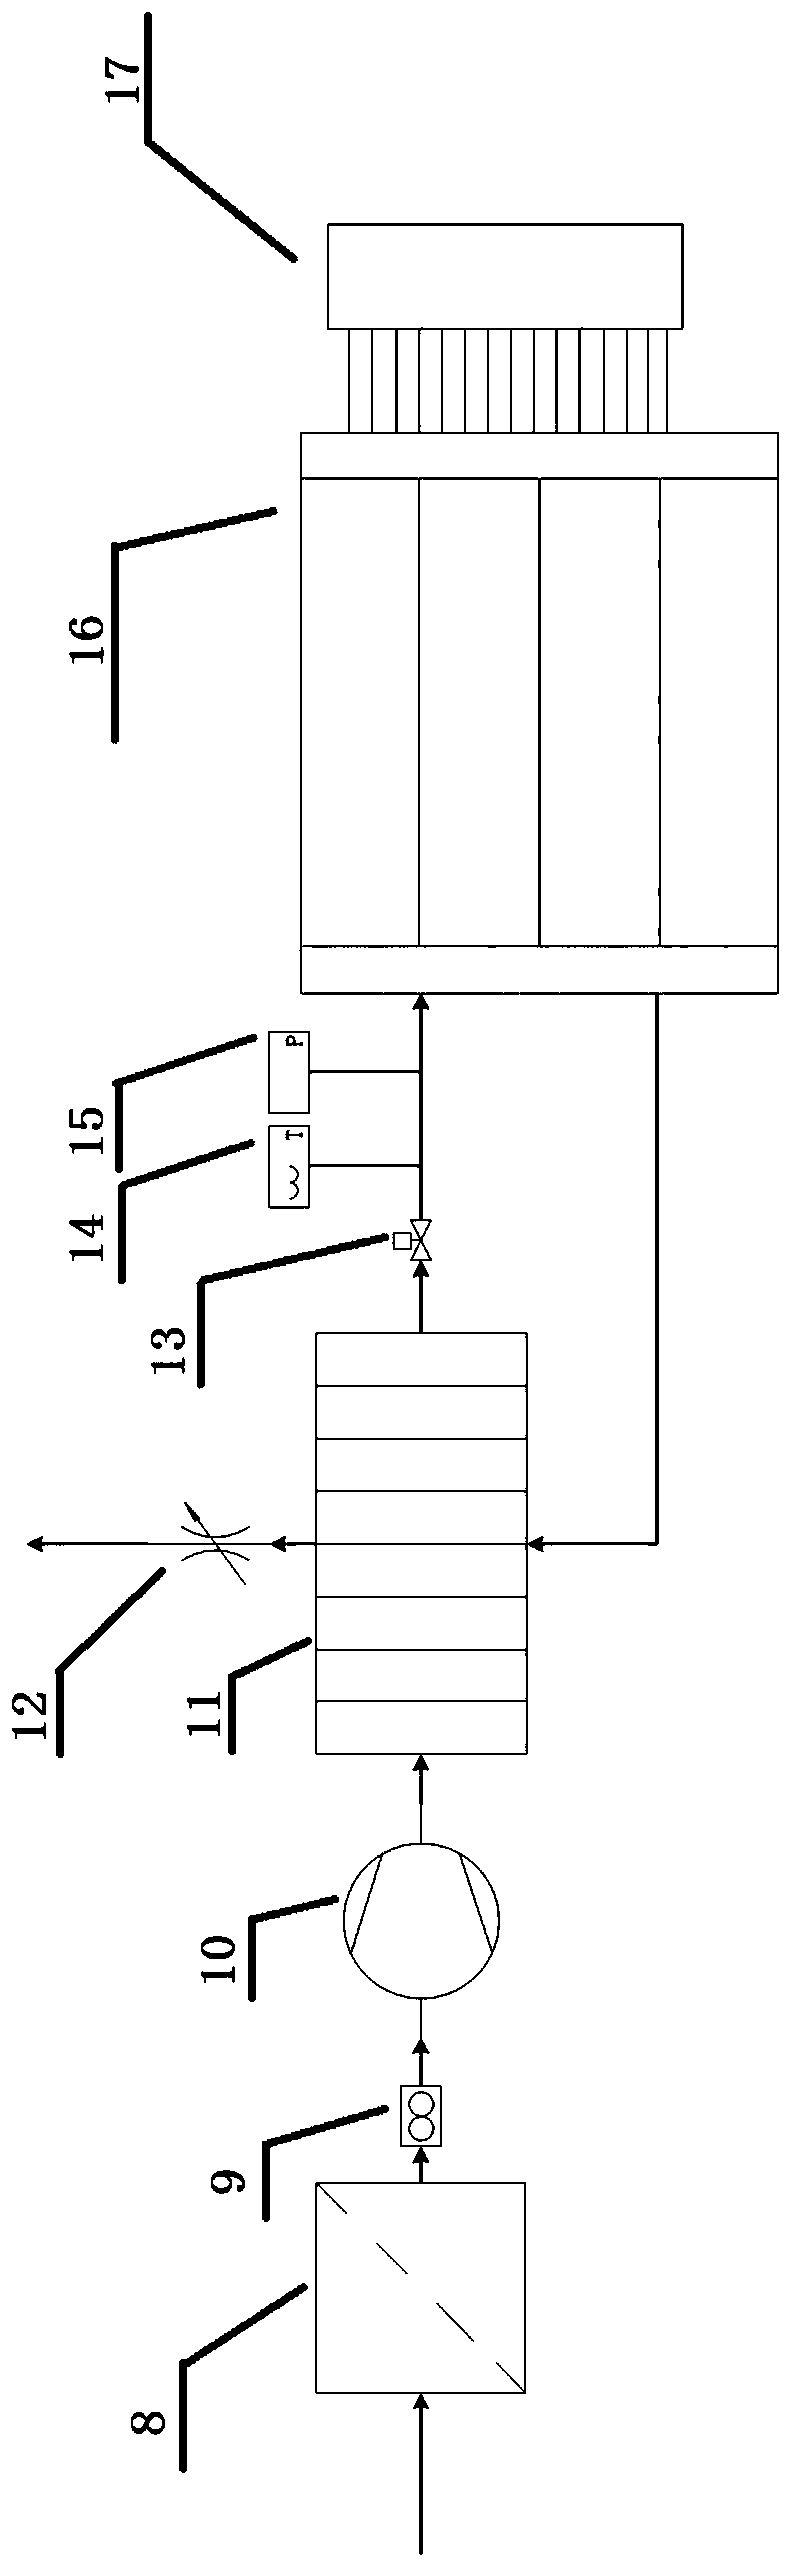 Fault diagnosis method and device for air supply system in fuel cell system